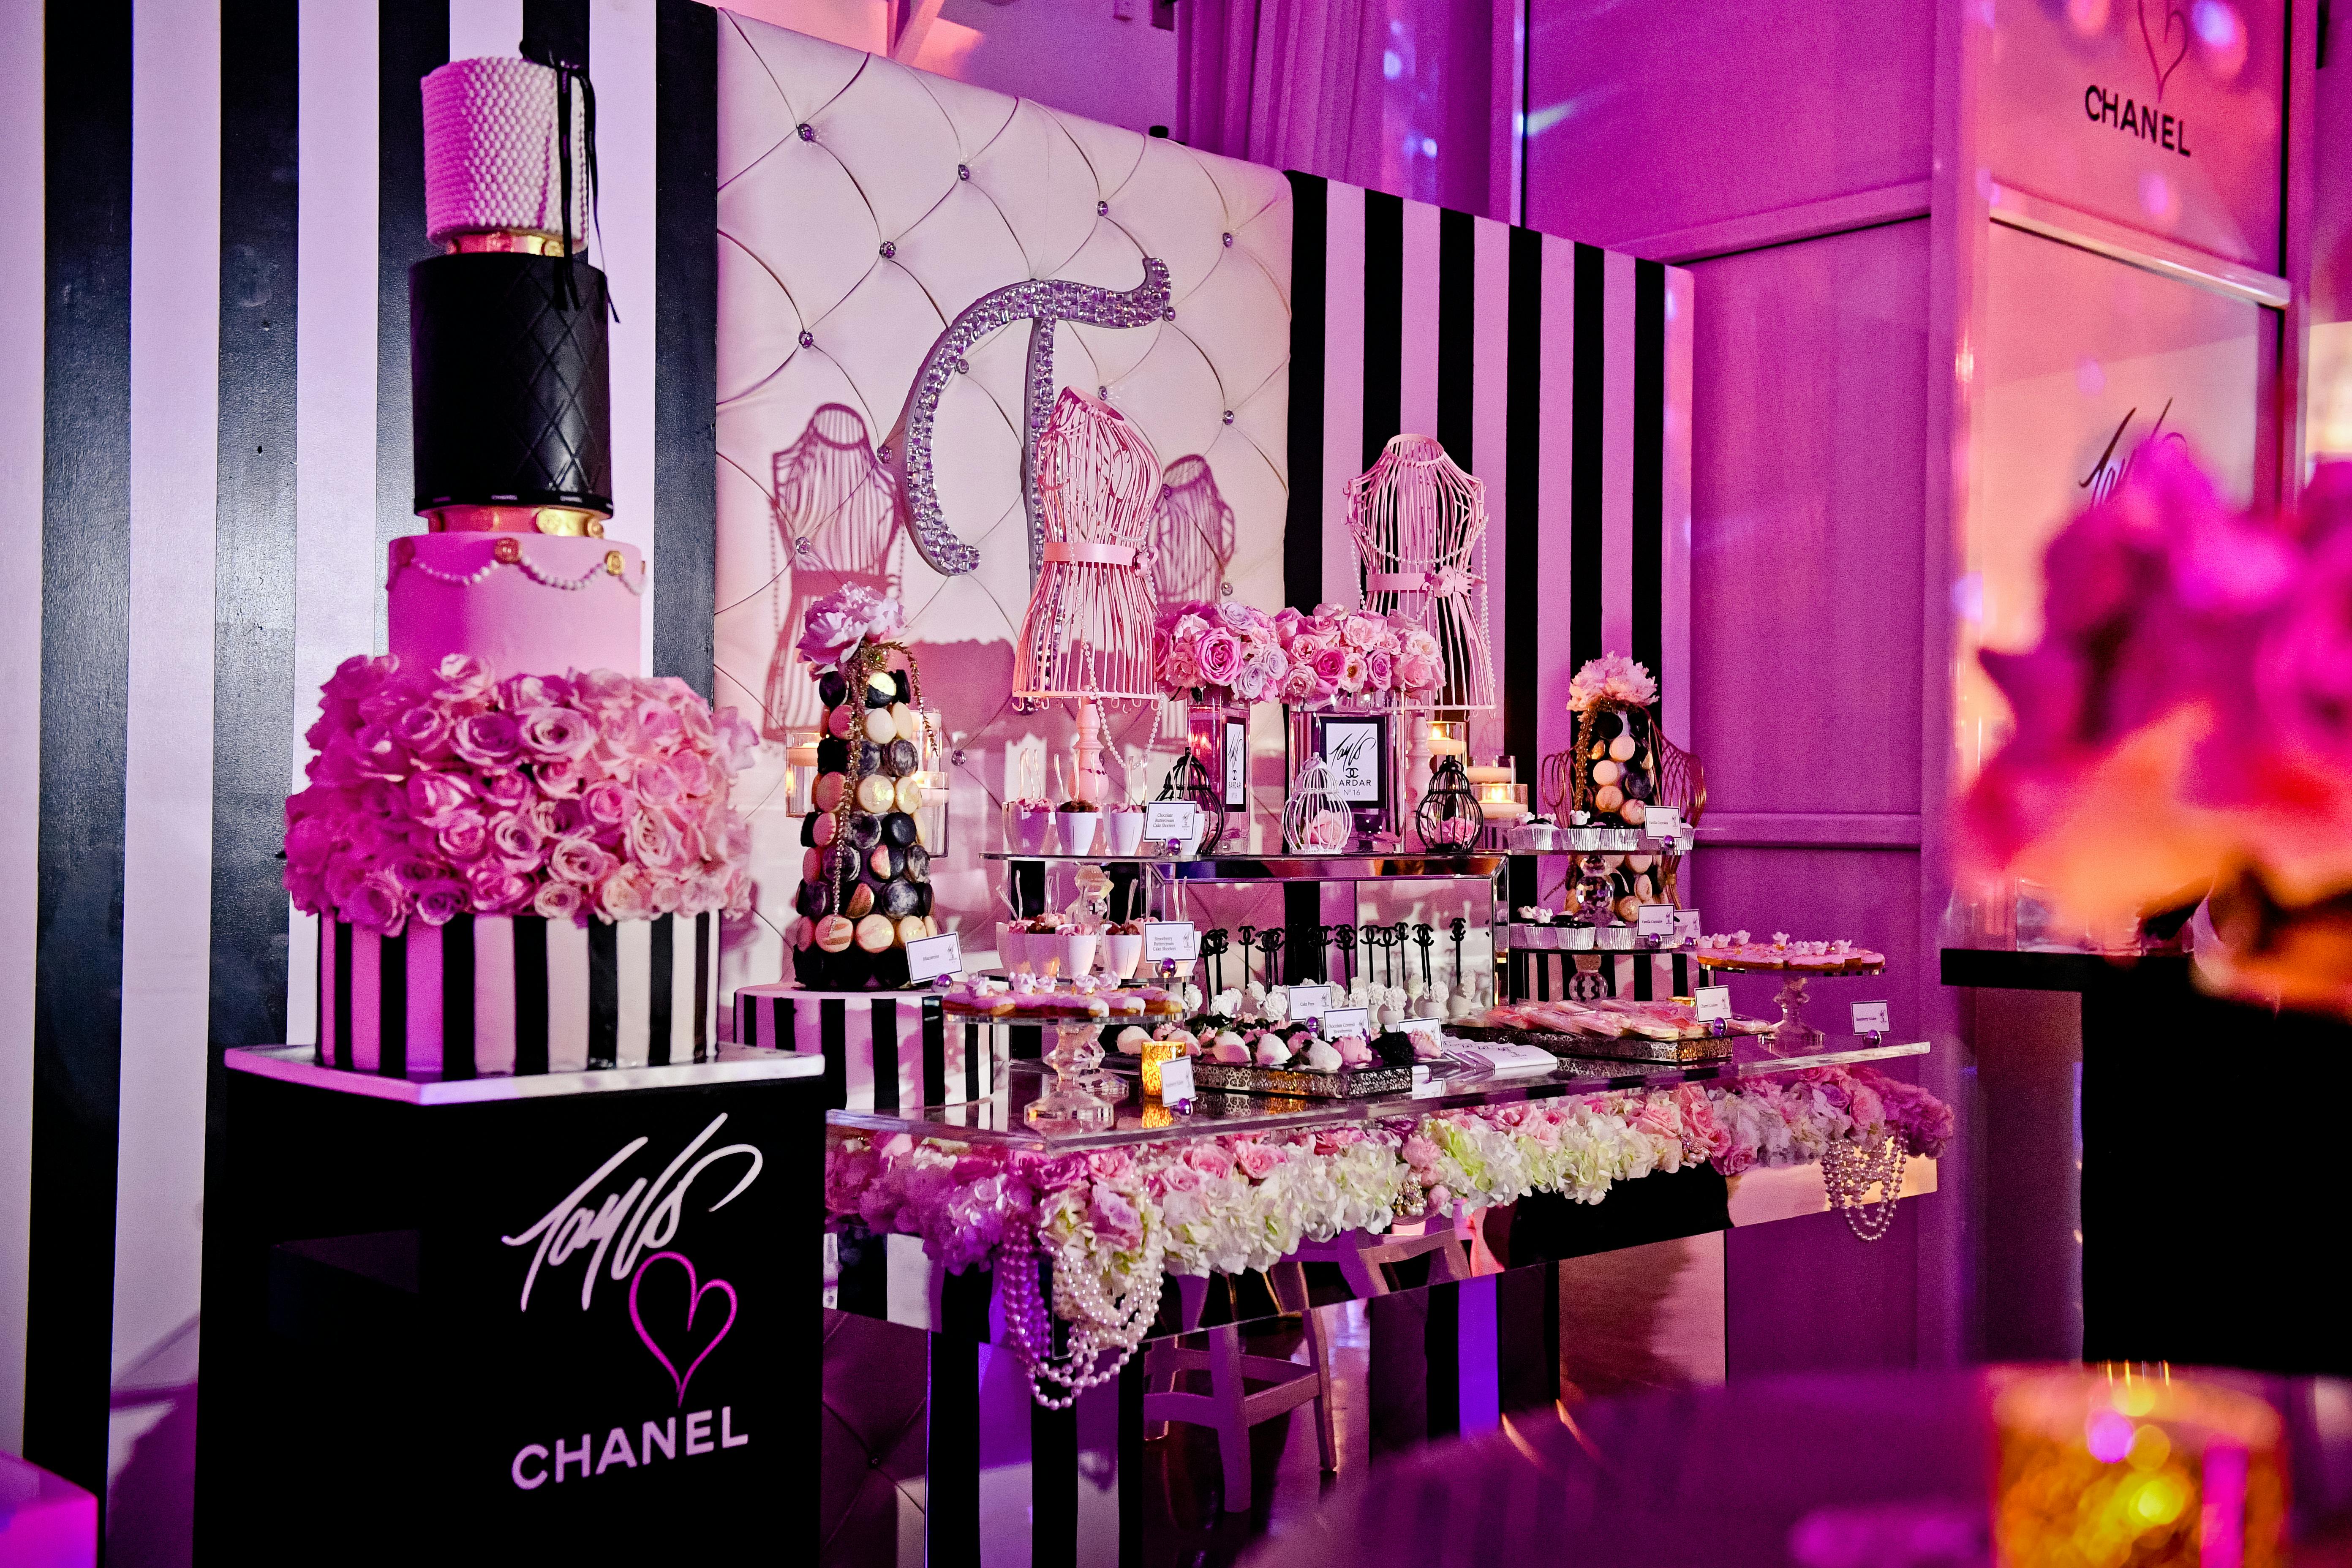 CHANEL SWEET 16 - FASHION FABULOUS AND ENTERTAINMENT! at The Temple House  in Miami, FL, THE TEMPLE HOUSE